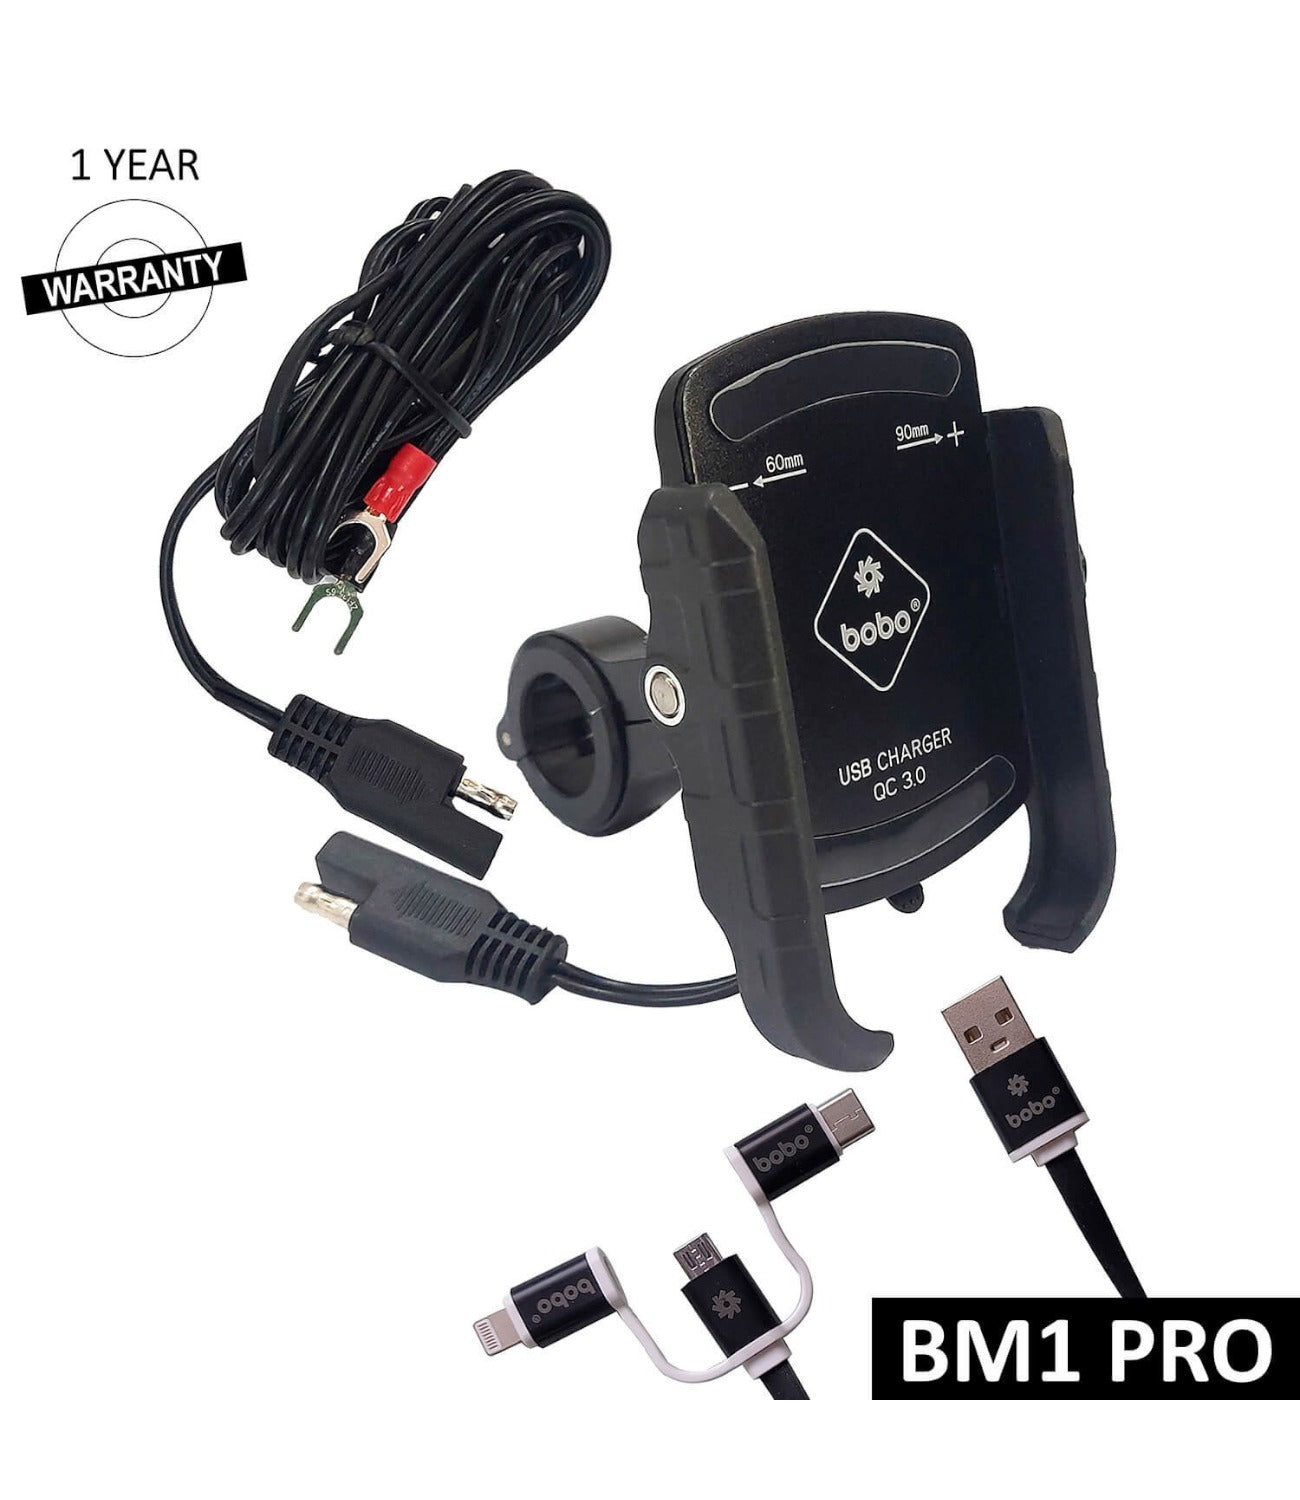 BOBO BM1 Pro Motorcycle Phone Holder (with fast USB 3.0 charger)